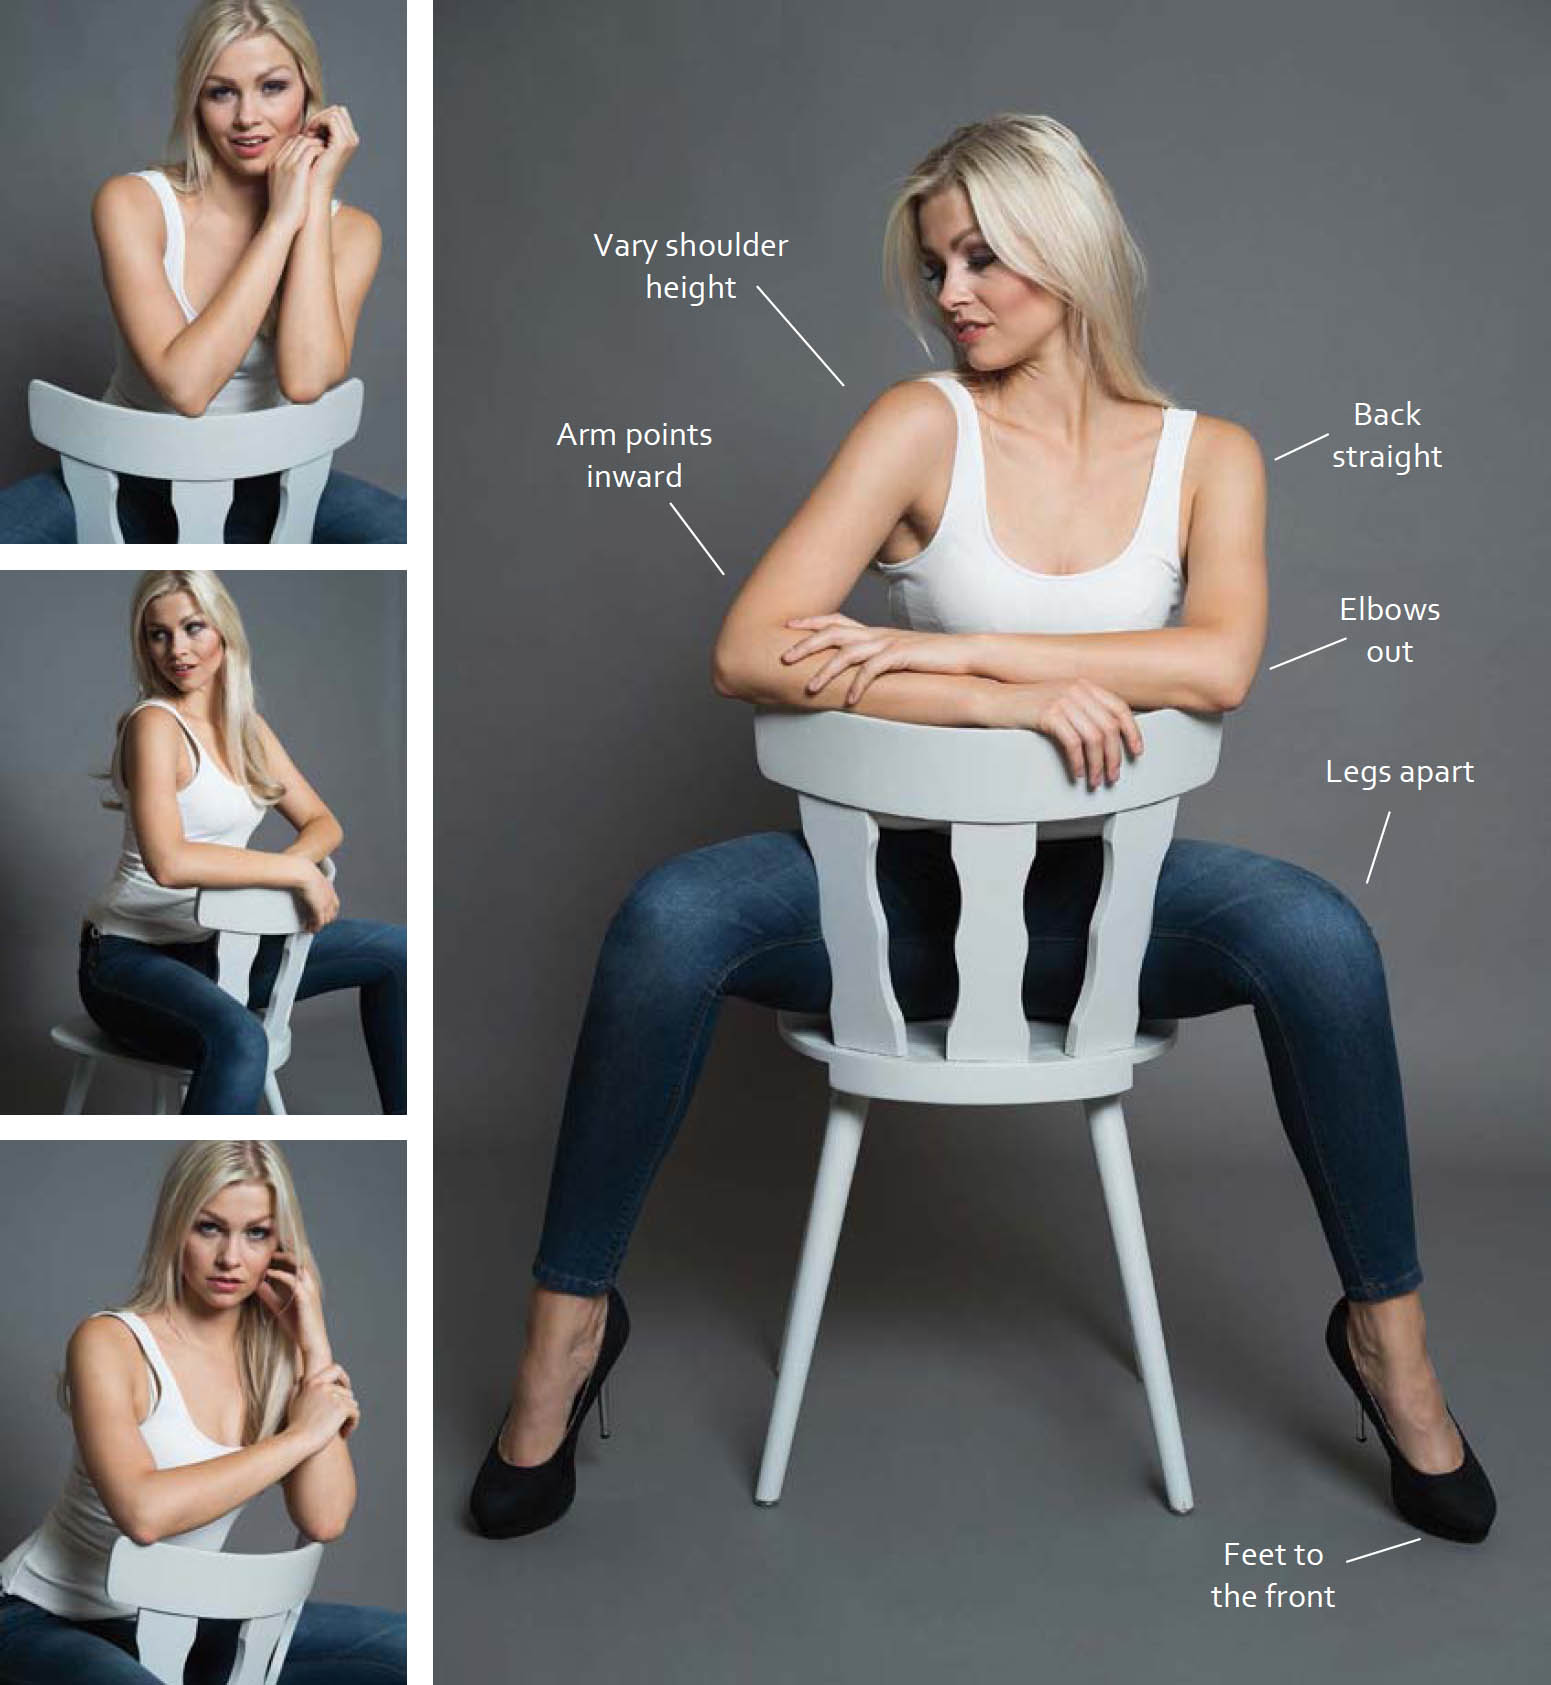 Poses ideas At home With Chair | Fashion photography poses, Fashion poses,  Photography poses